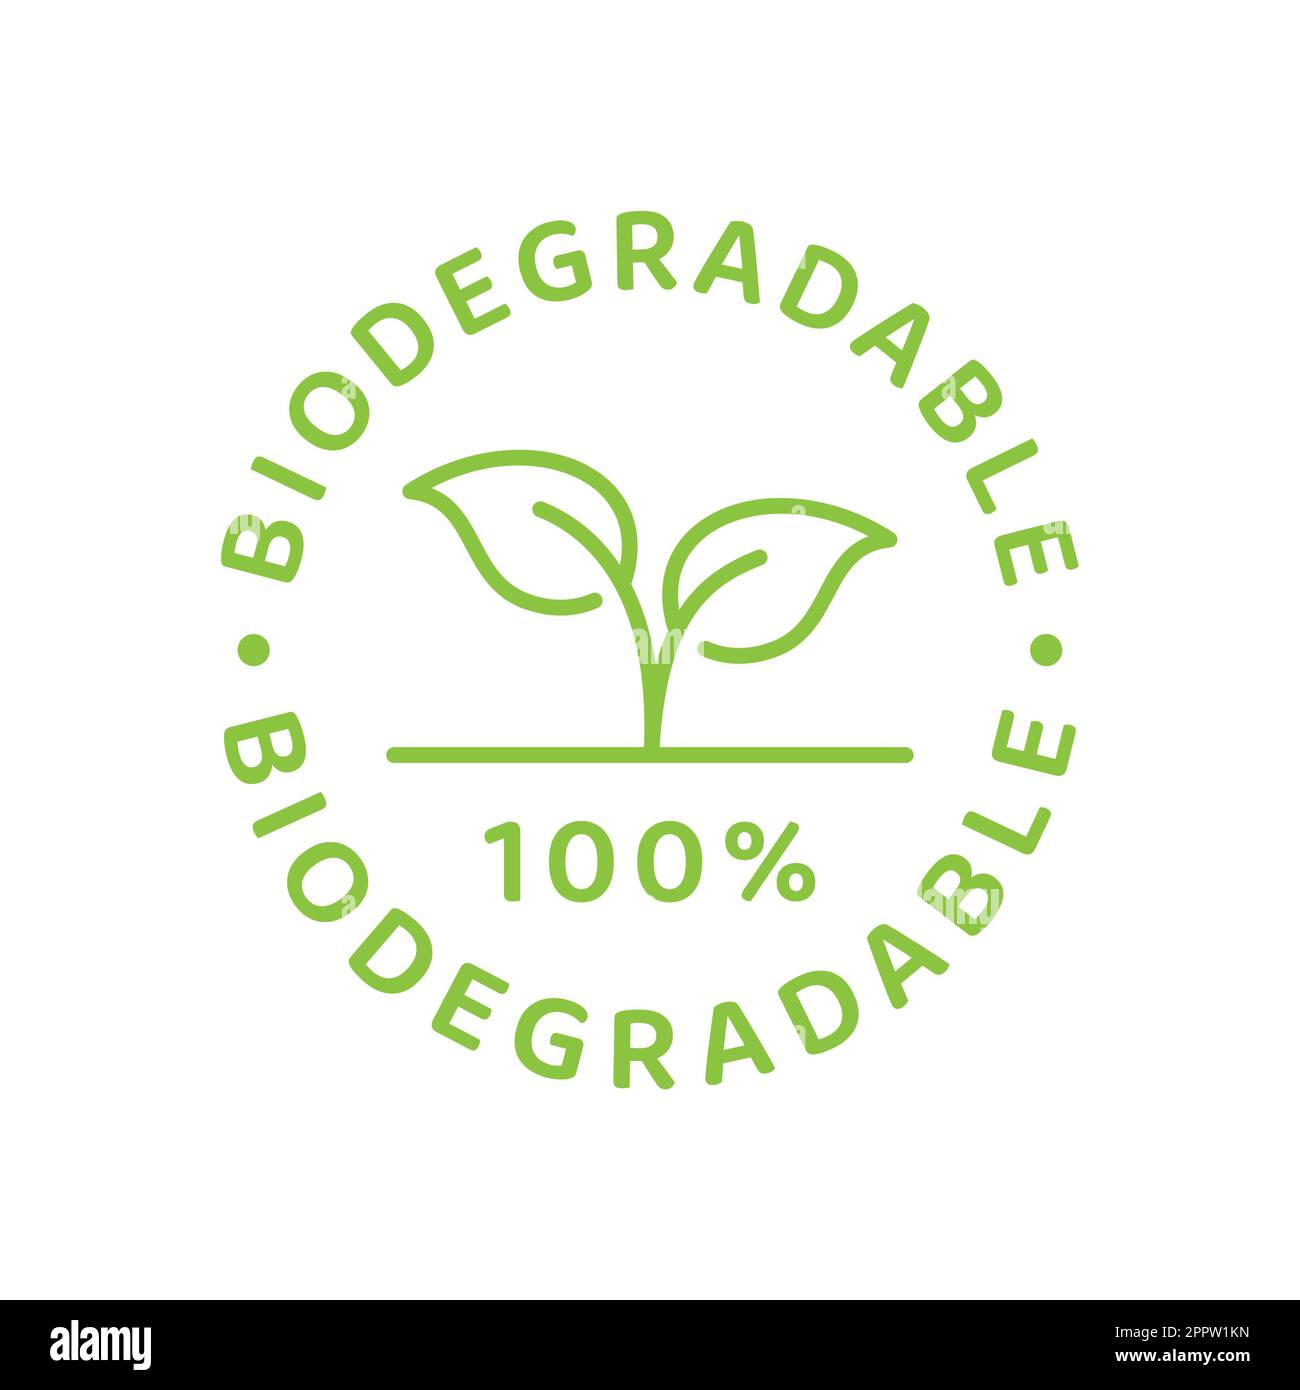 Biodegradable label in green with leaf and circle Stock Vector